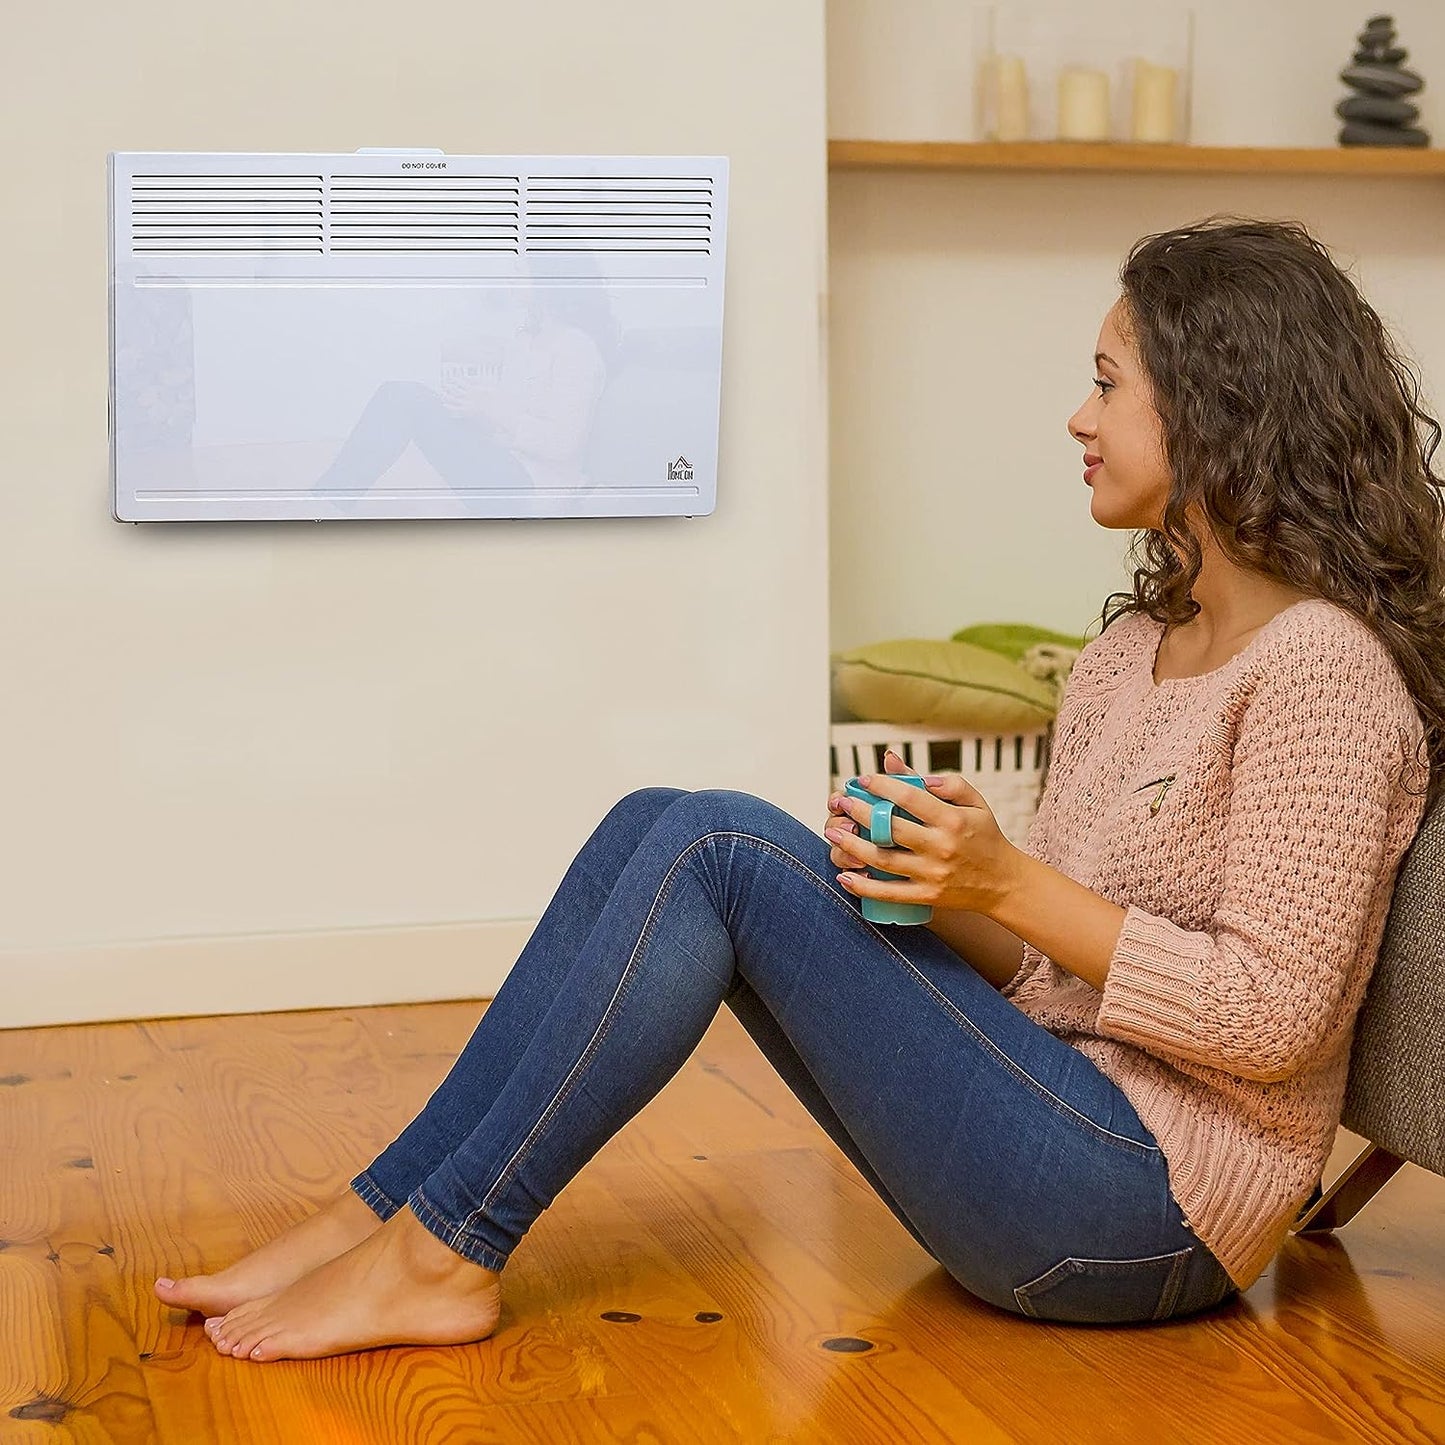 Maplin Freestanding / Wall-Mounted Convector Portable Radiator Heater with Adjustable Thermostat - maplin.co.uk